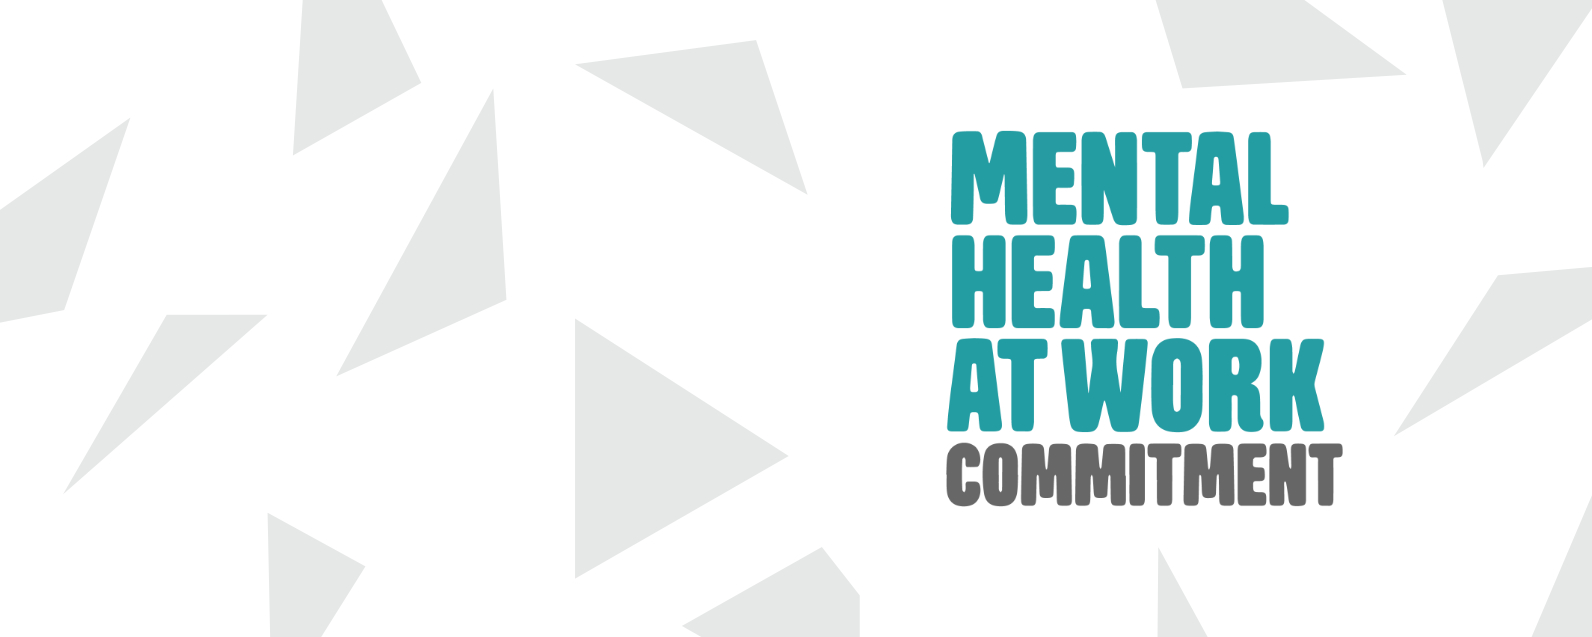 Mental-Health-at-Work-Commitment